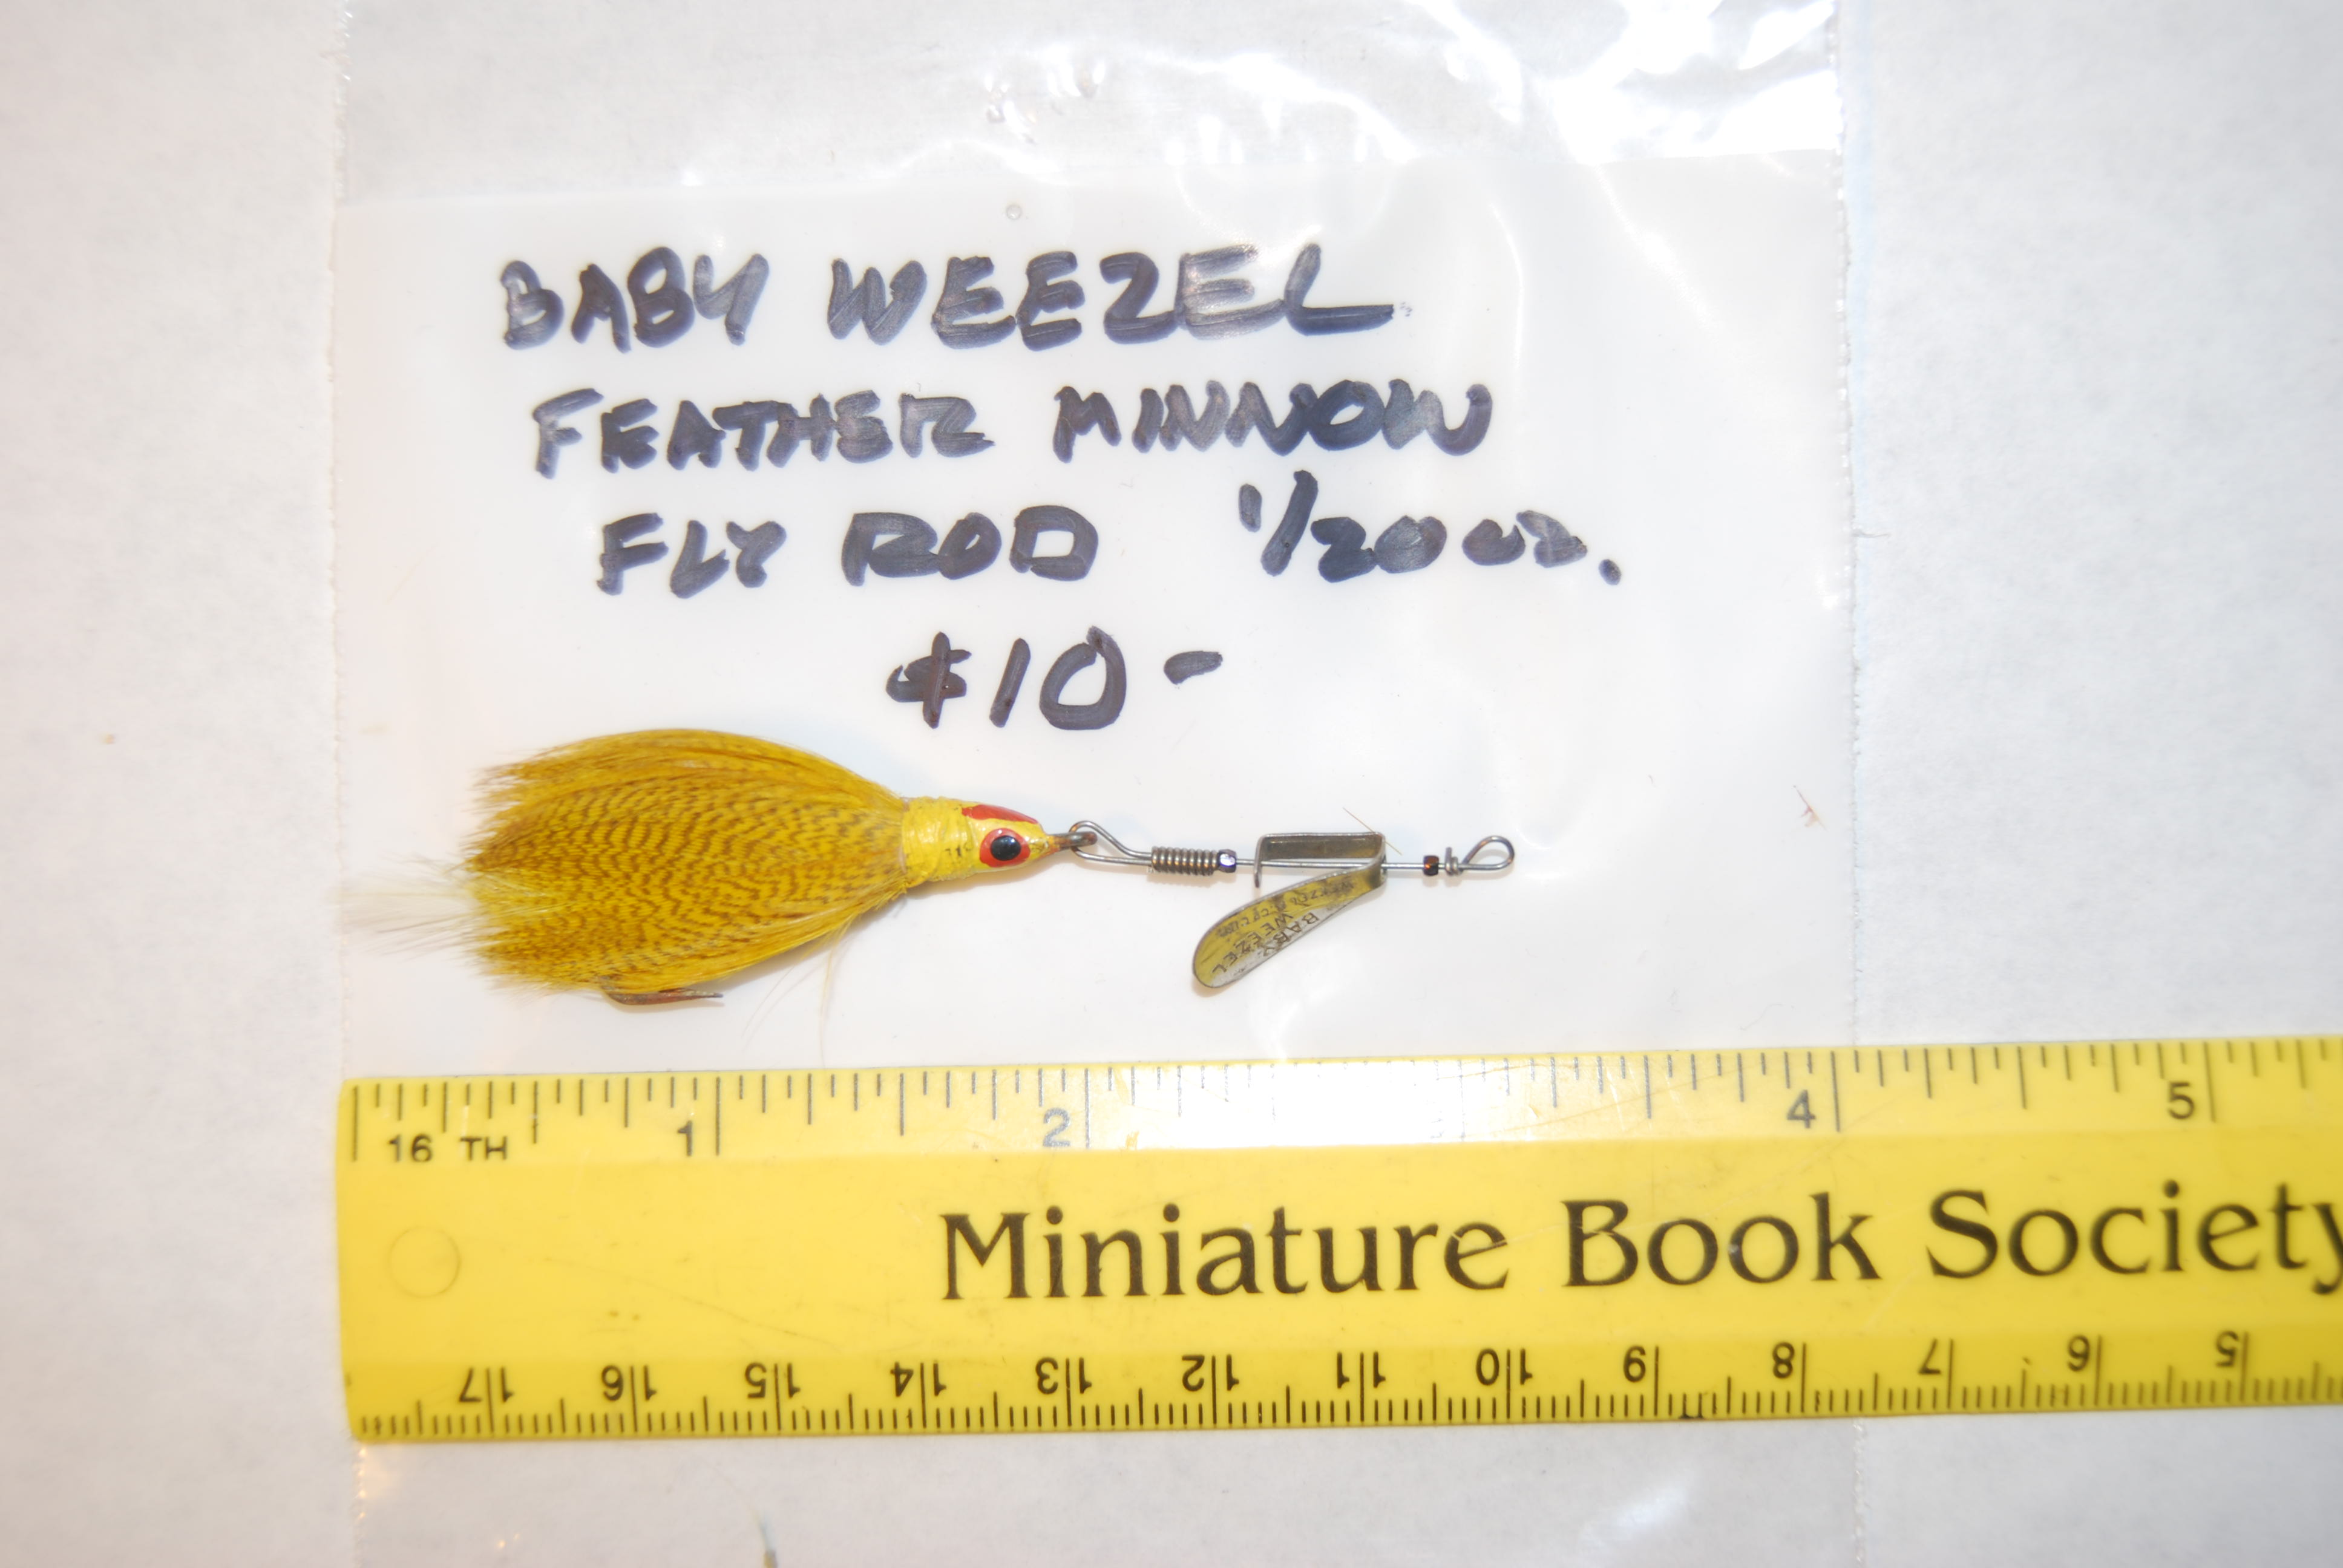 “BABY WEEZEL FEATHERED MINNOW' Fly Rod Lure 1/20 oz. Marked on Spinner:  “Baby Weezel/ Weezel Bait Co. Cin.”